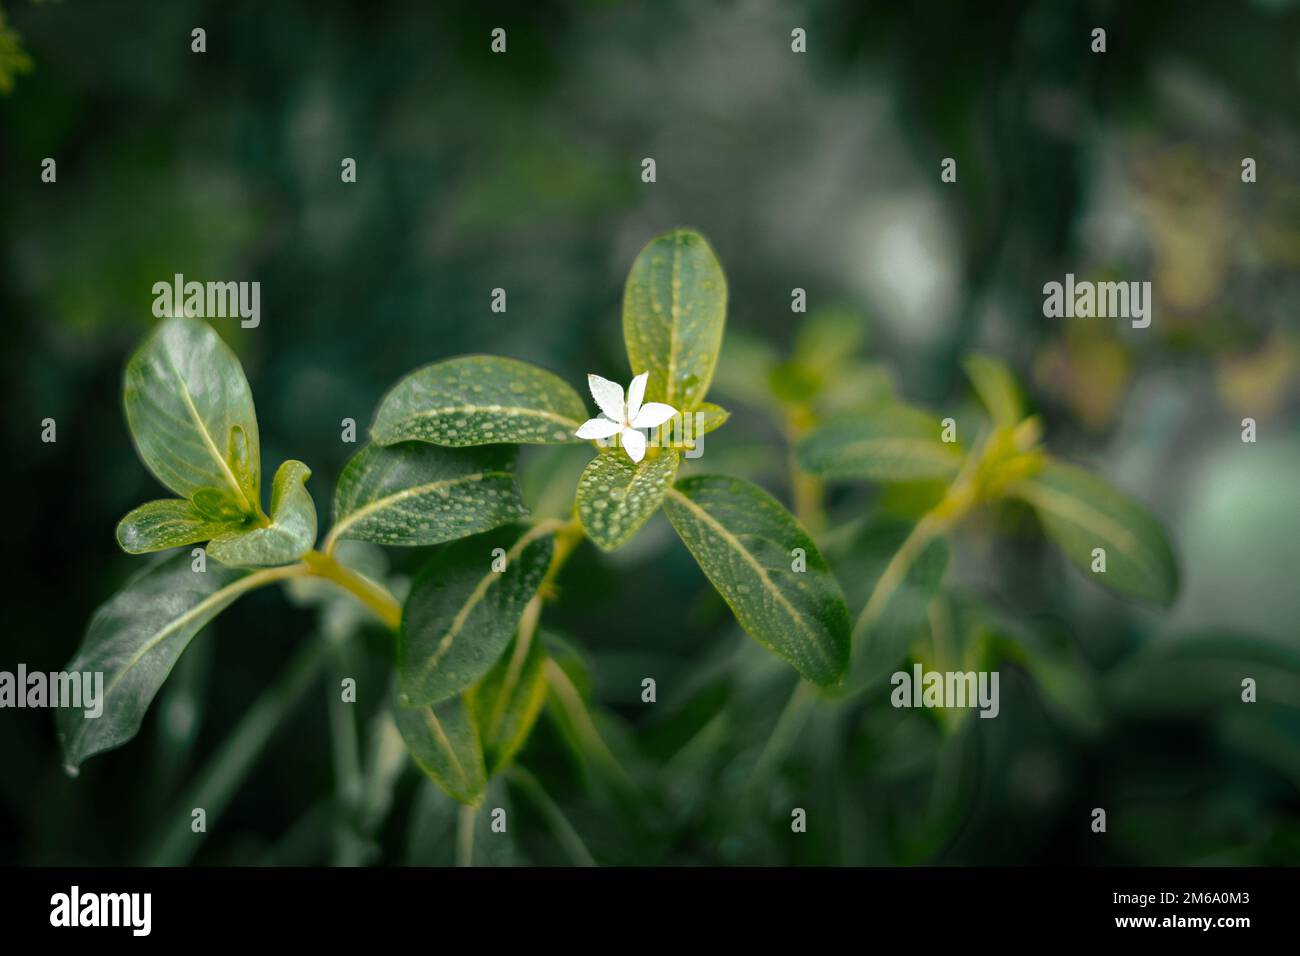 A closeup of a Barleria plant against the blurred background Stock Photo